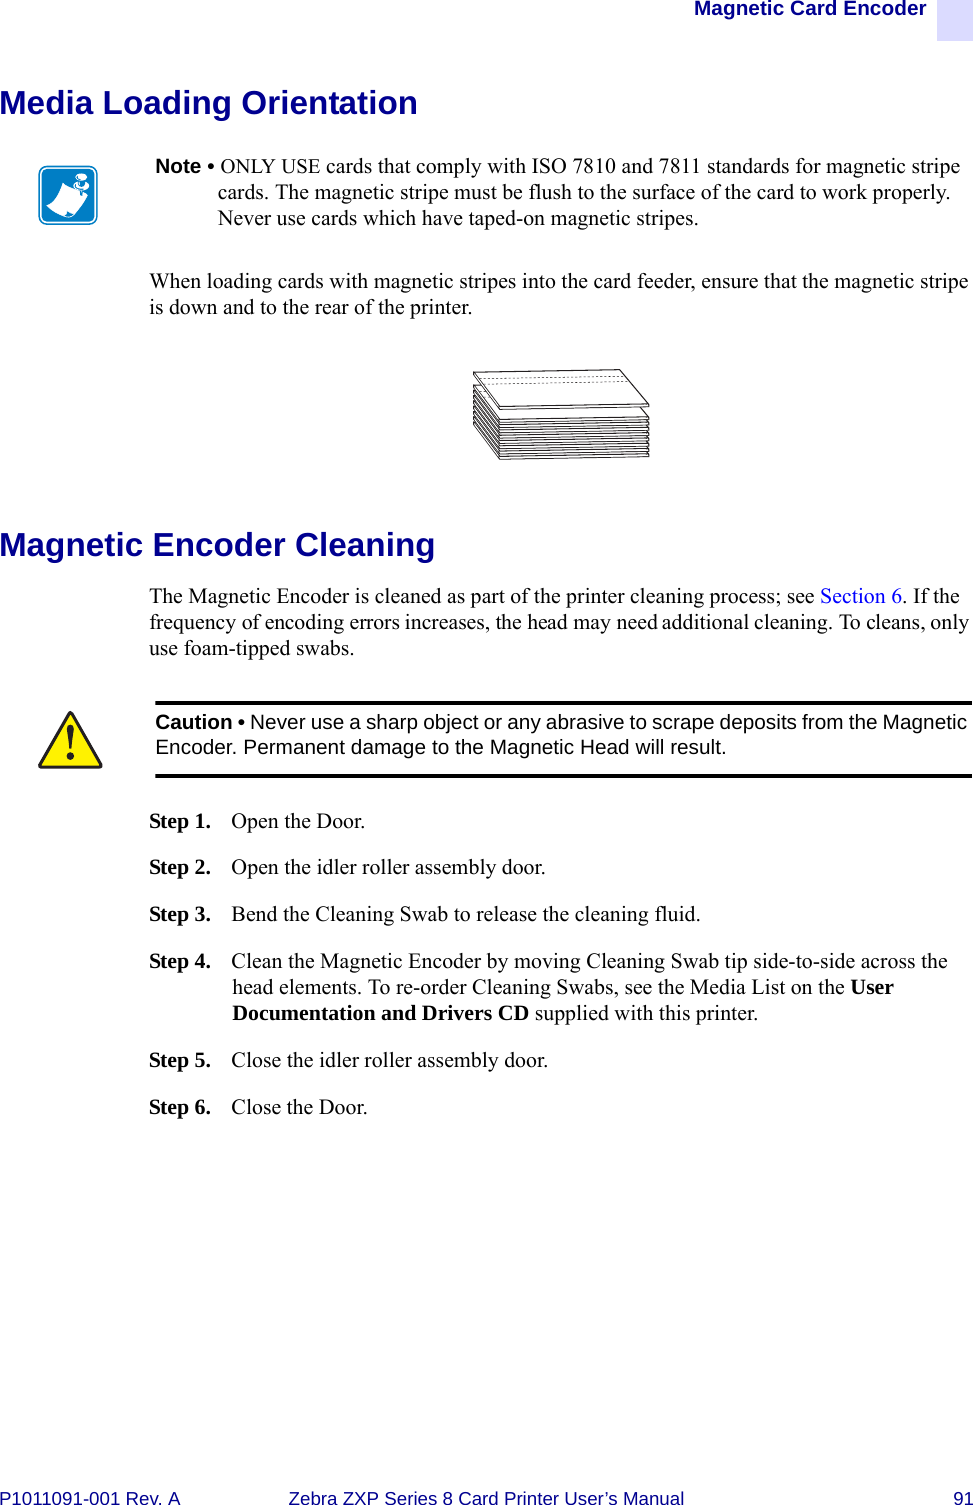 Magnetic Card EncoderP1011091-001 Rev. A Zebra ZXP Series 8 Card Printer User’s Manual 91Media Loading OrientationWhen loading cards with magnetic stripes into the card feeder, ensure that the magnetic stripe is down and to the rear of the printer.Magnetic Encoder CleaningThe Magnetic Encoder is cleaned as part of the printer cleaning process; see Section 6. If the frequency of encoding errors increases, the head may need additional cleaning. To cleans, only use foam-tipped swabs.Step 1. Open the Door.Step 2. Open the idler roller assembly door.Step 3. Bend the Cleaning Swab to release the cleaning fluid.Step 4. Clean the Magnetic Encoder by moving Cleaning Swab tip side-to-side across the head elements. To re-order Cleaning Swabs, see the Media List on the User Documentation and Drivers CD supplied with this printer.Step 5. Close the idler roller assembly door.Step 6. Close the Door.Note • ONLY USE cards that comply with ISO 7810 and 7811 standards for magnetic stripe cards. The magnetic stripe must be flush to the surface of the card to work properly. Never use cards which have taped-on magnetic stripes.Caution • Never use a sharp object or any abrasive to scrape deposits from the Magnetic Encoder. Permanent damage to the Magnetic Head will result.